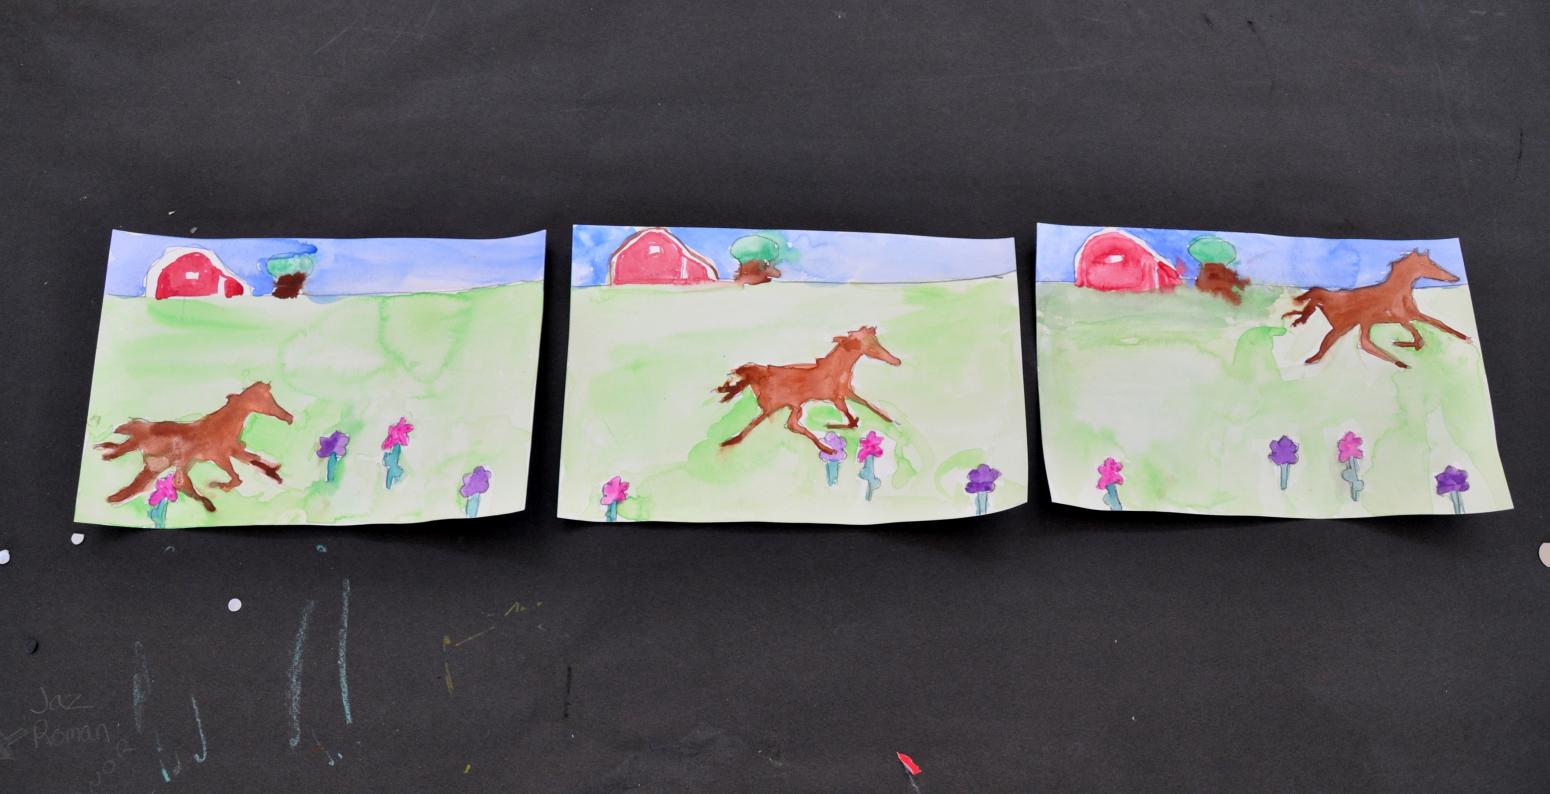 The paintings with a horse running across a field.